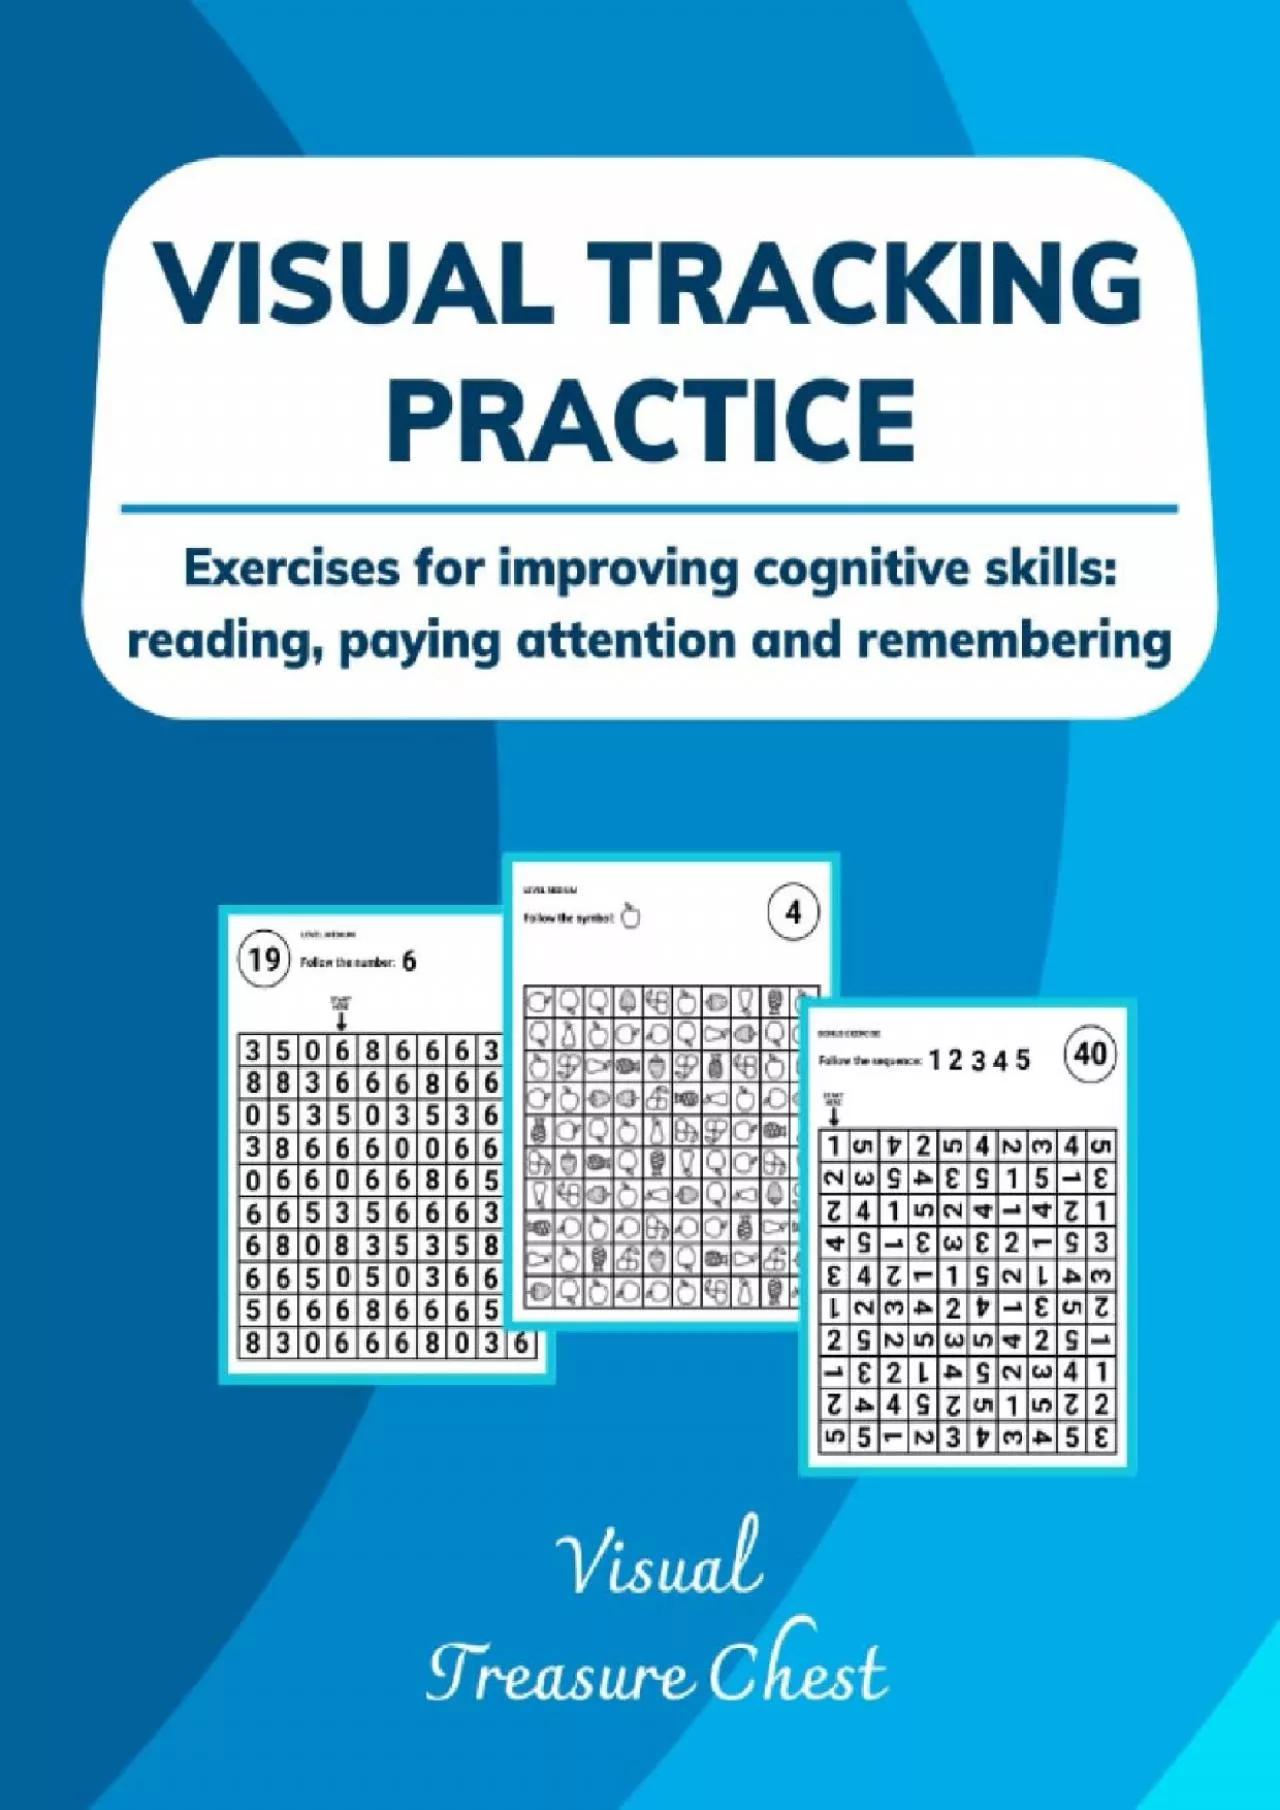 [EBOOK] Visual Tracking Practice: Exercises for improving cognitive skills: reading paying